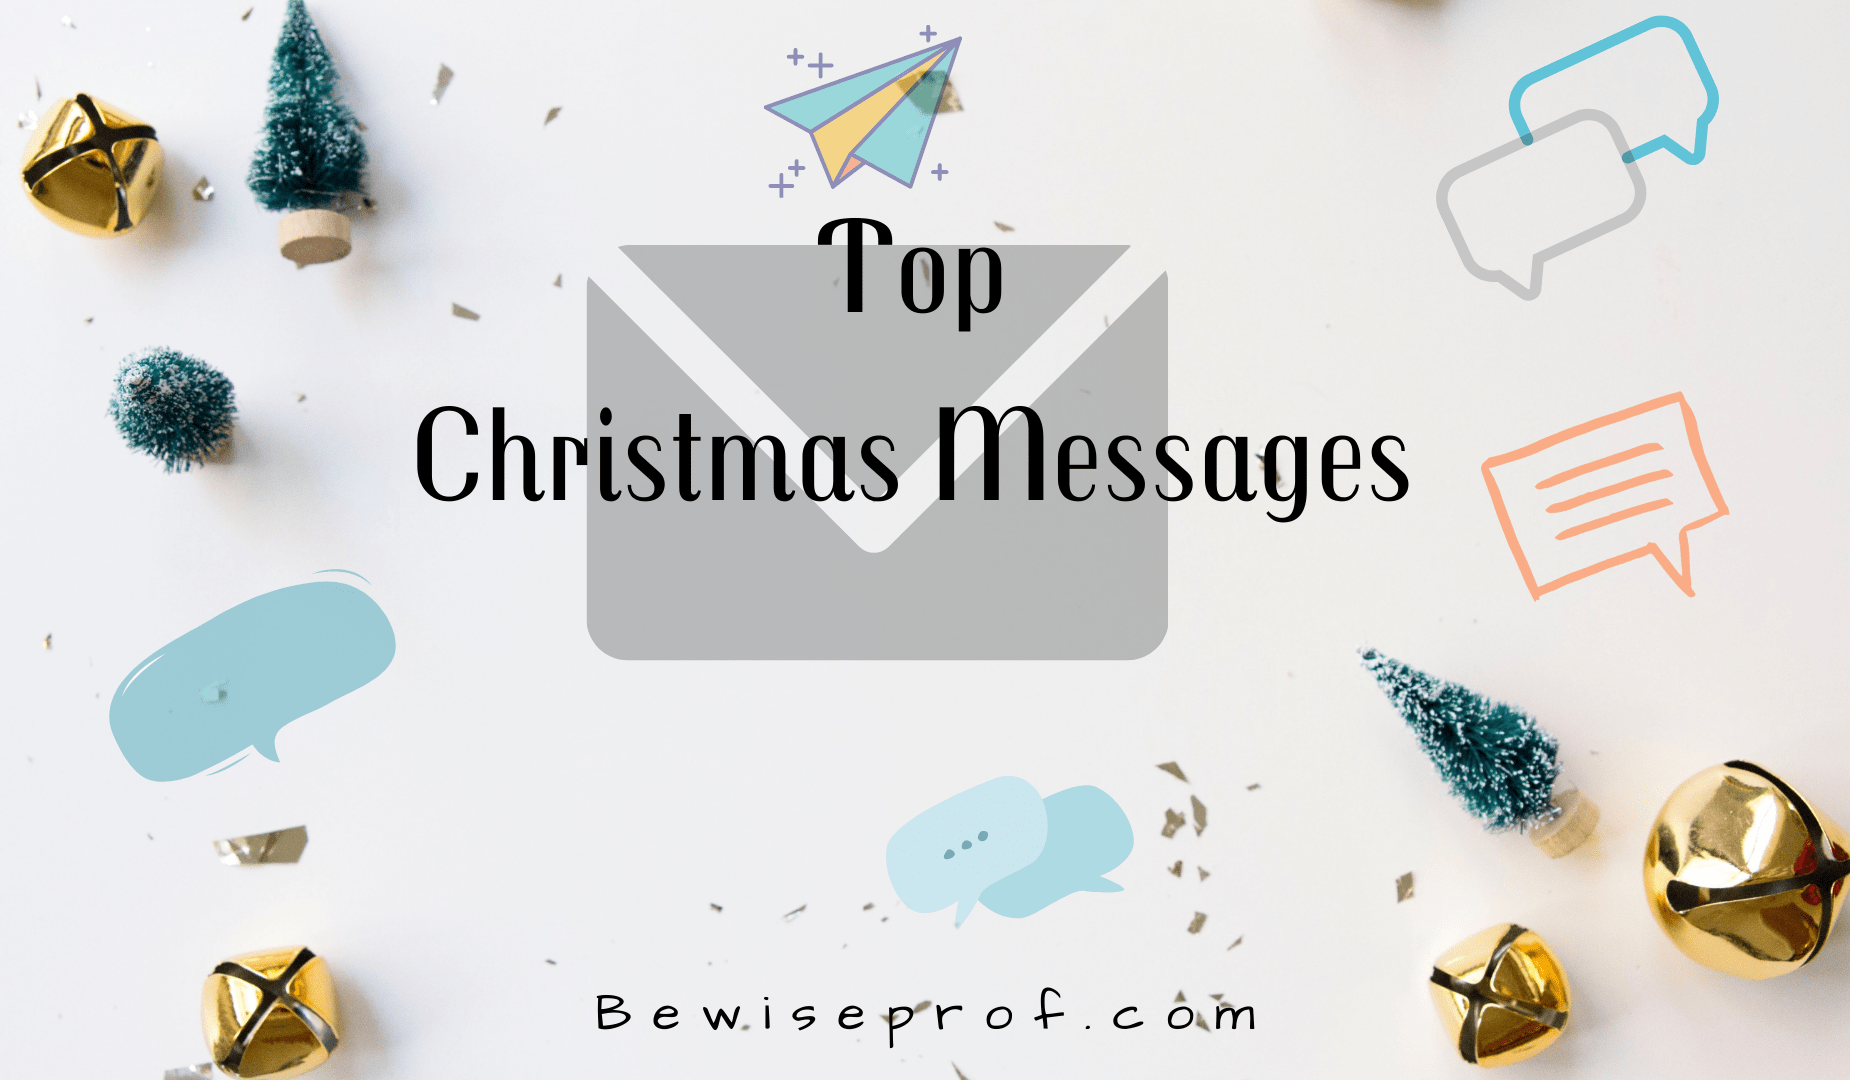 Top Christmas Messages In 2020